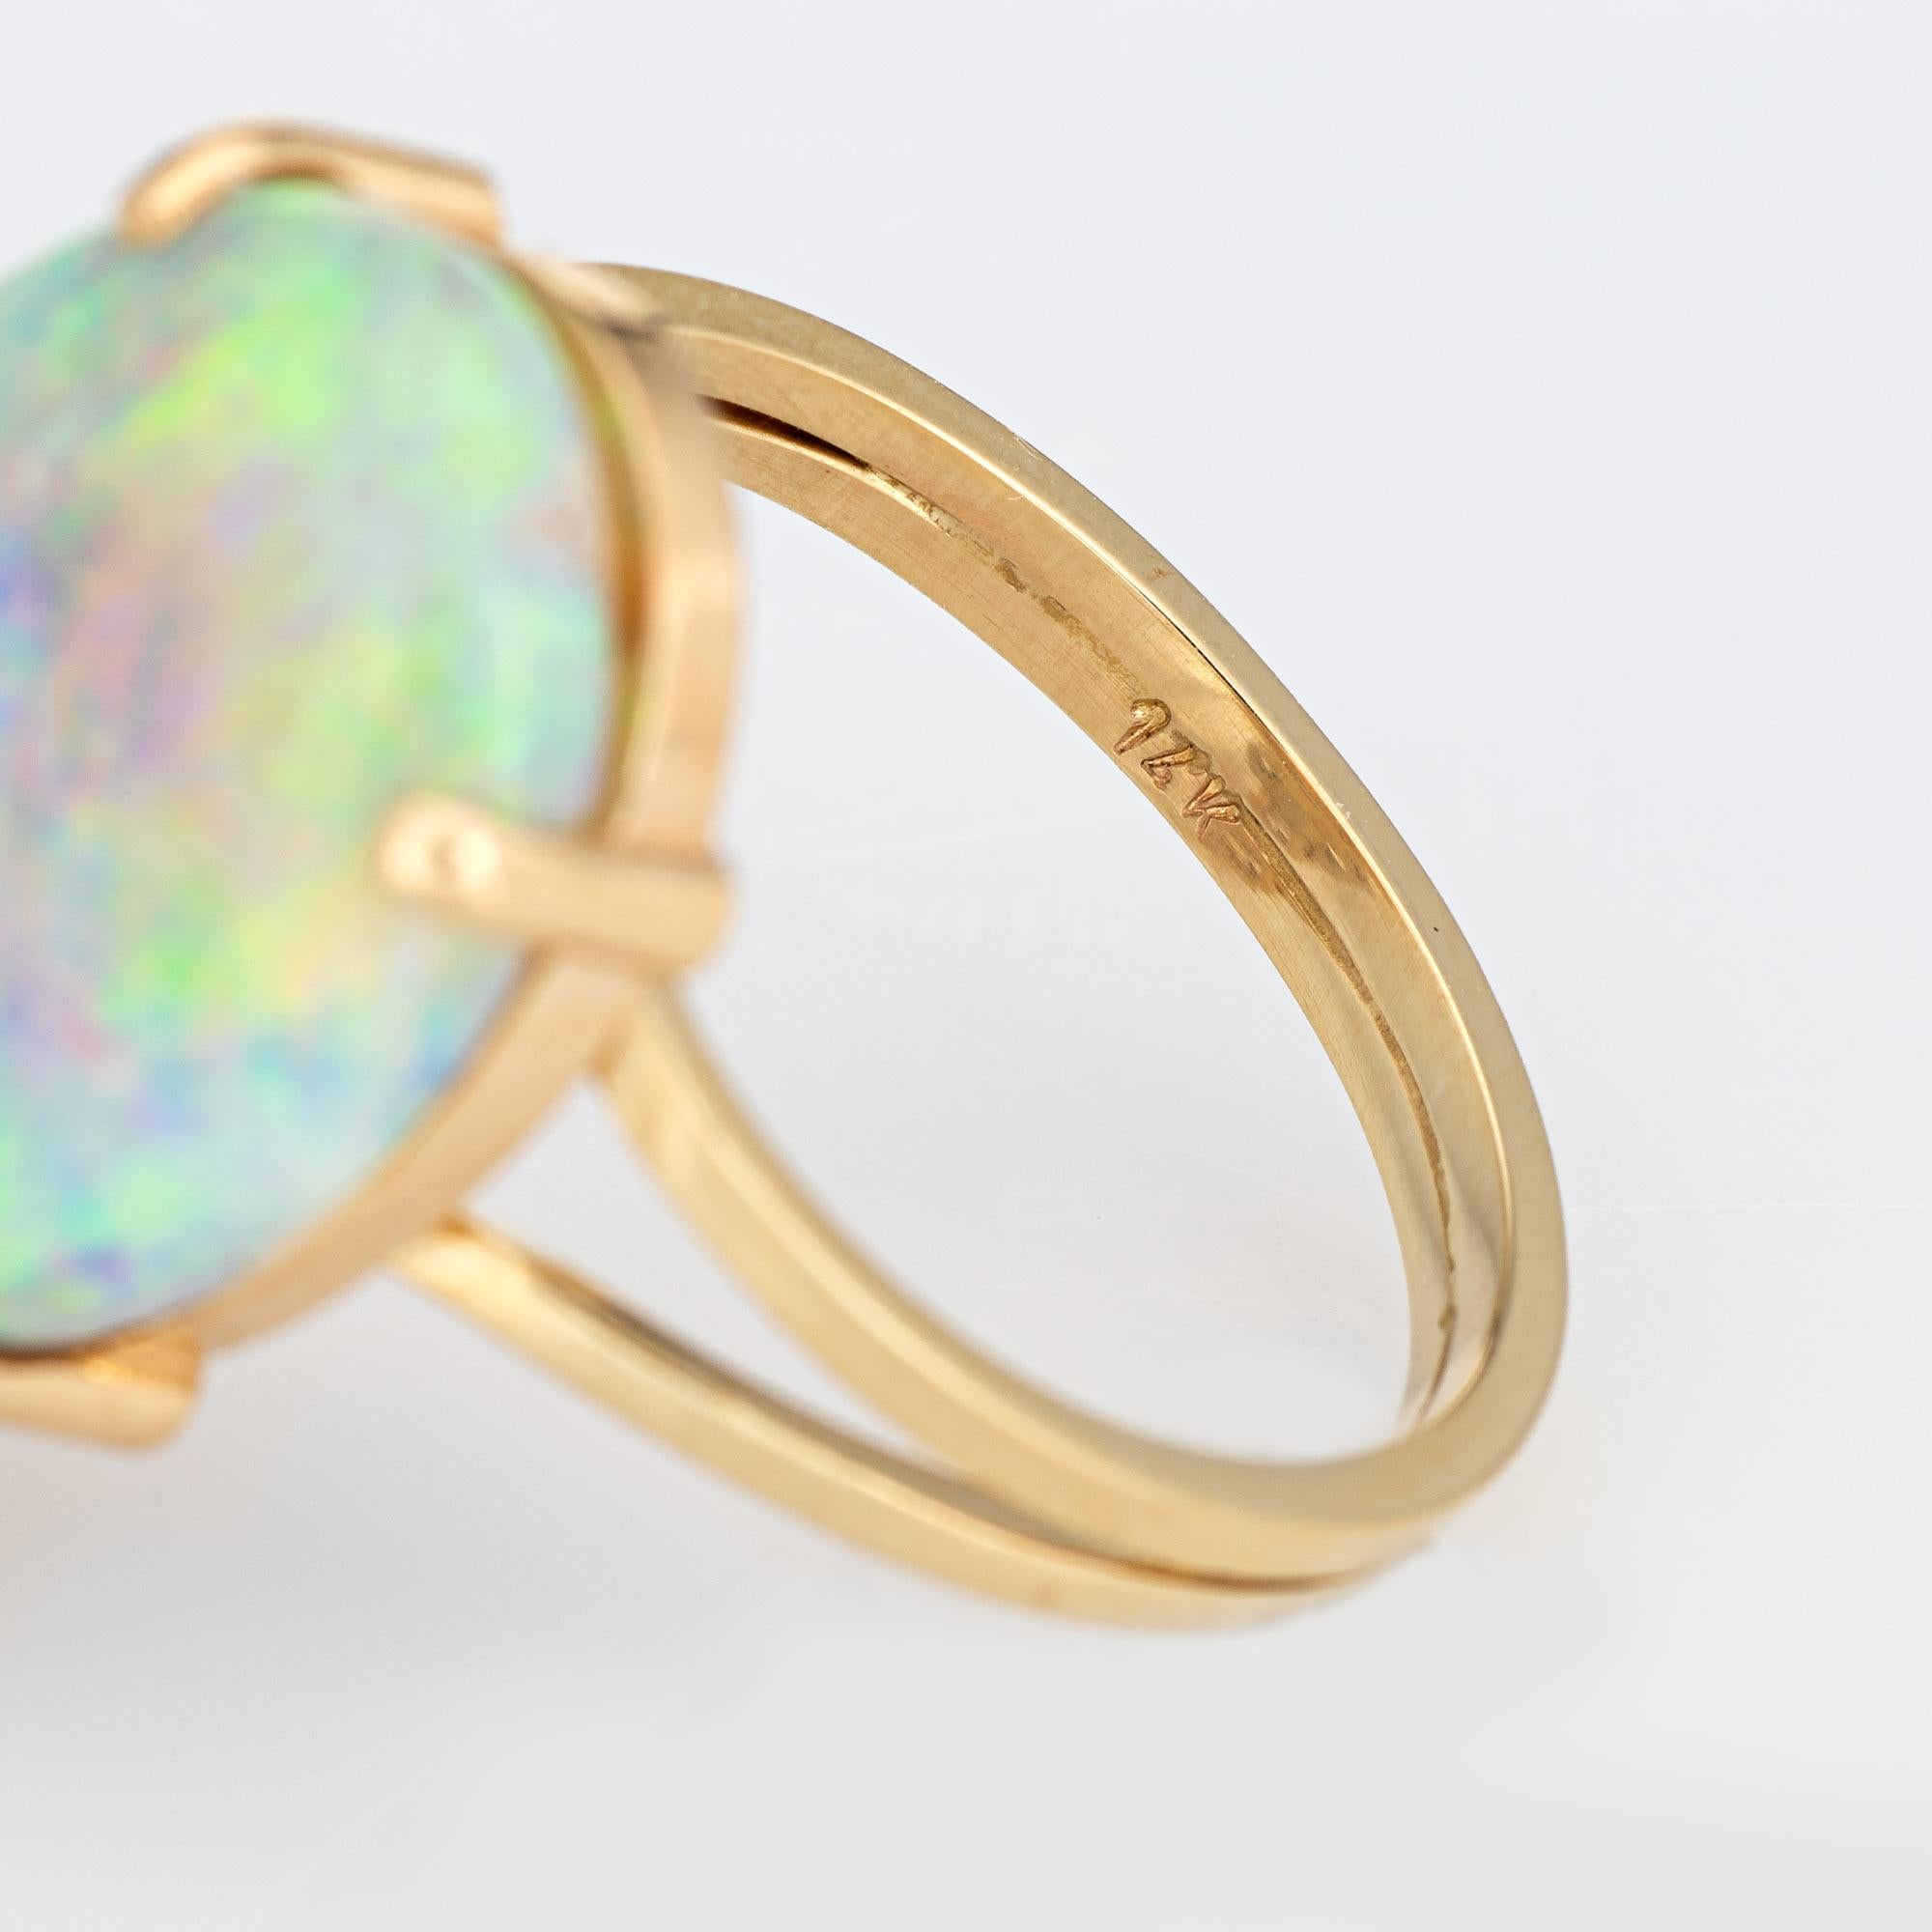 Natural Opal Diamond Ring Vintage 14k Yellow Gold Oval Crown Jewelry In Good Condition For Sale In Torrance, CA